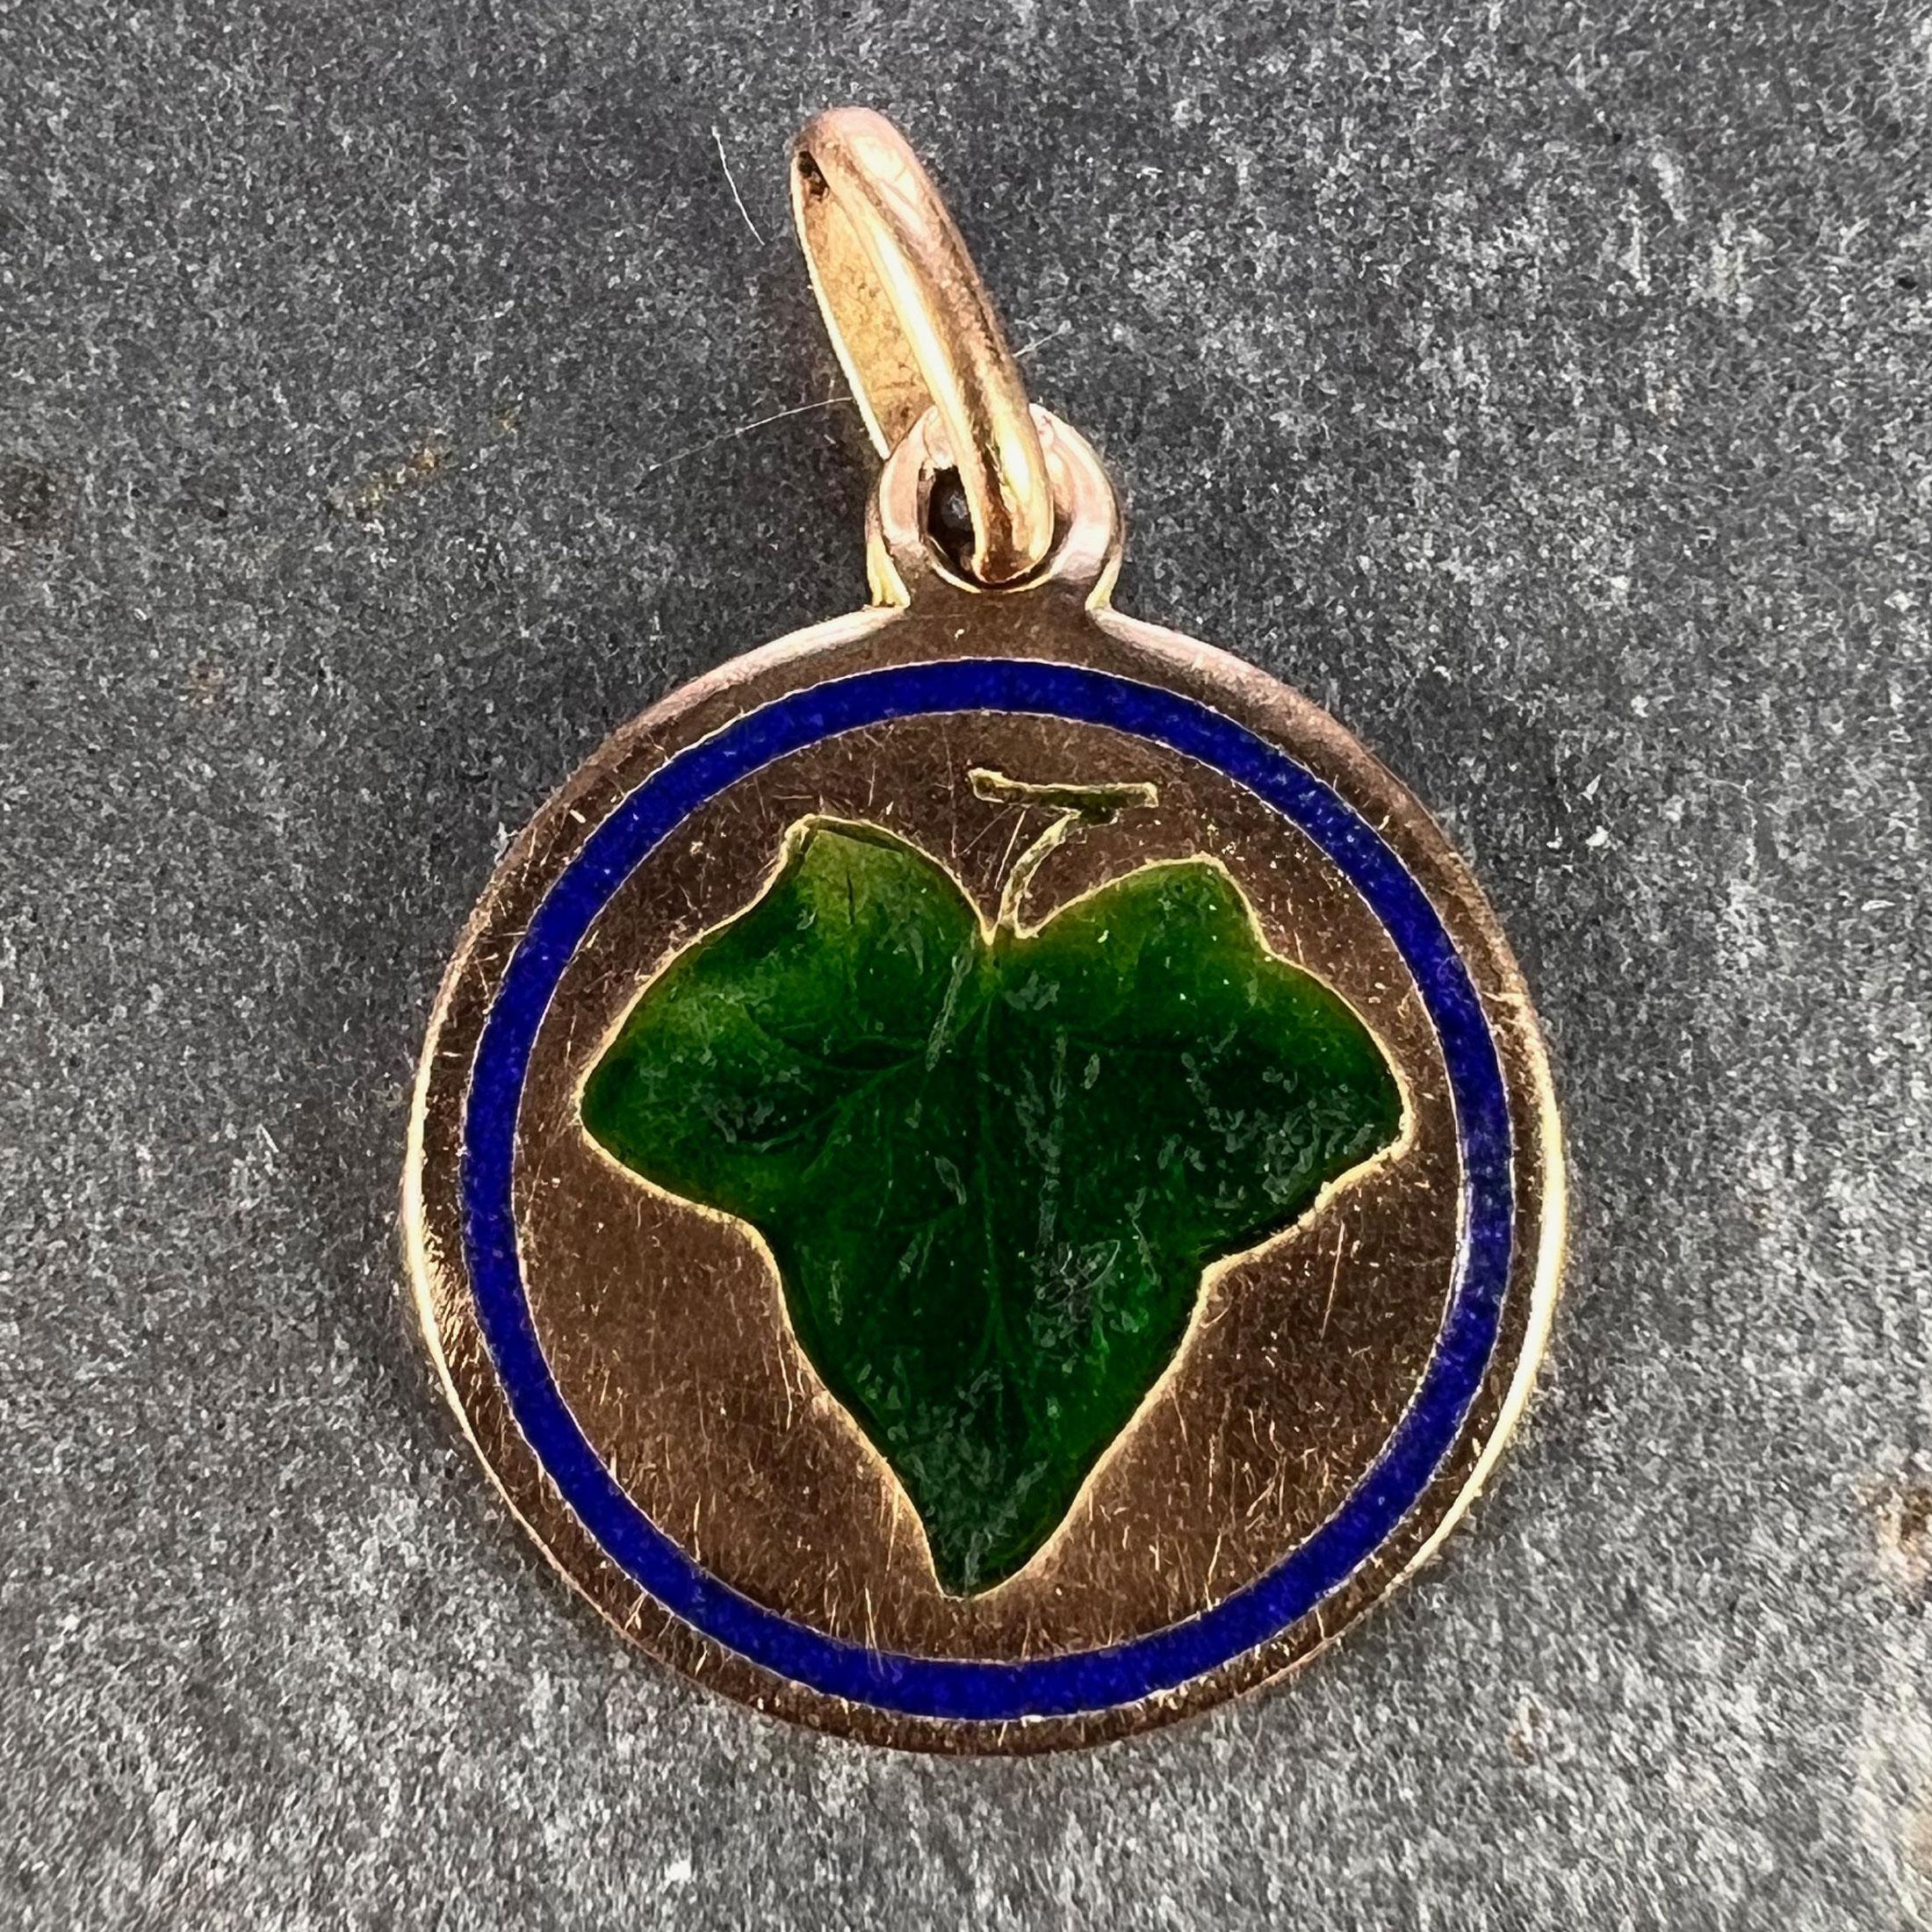 A 9 karat (9K) rose gold charm pendant designed as a disc depicting a green enamel ivy leaf surrounded by a blue enamel border. The ivy leaf represents fidelty and devotion. Stamped with a French import mark for 9 karat gold to the pendant loop,